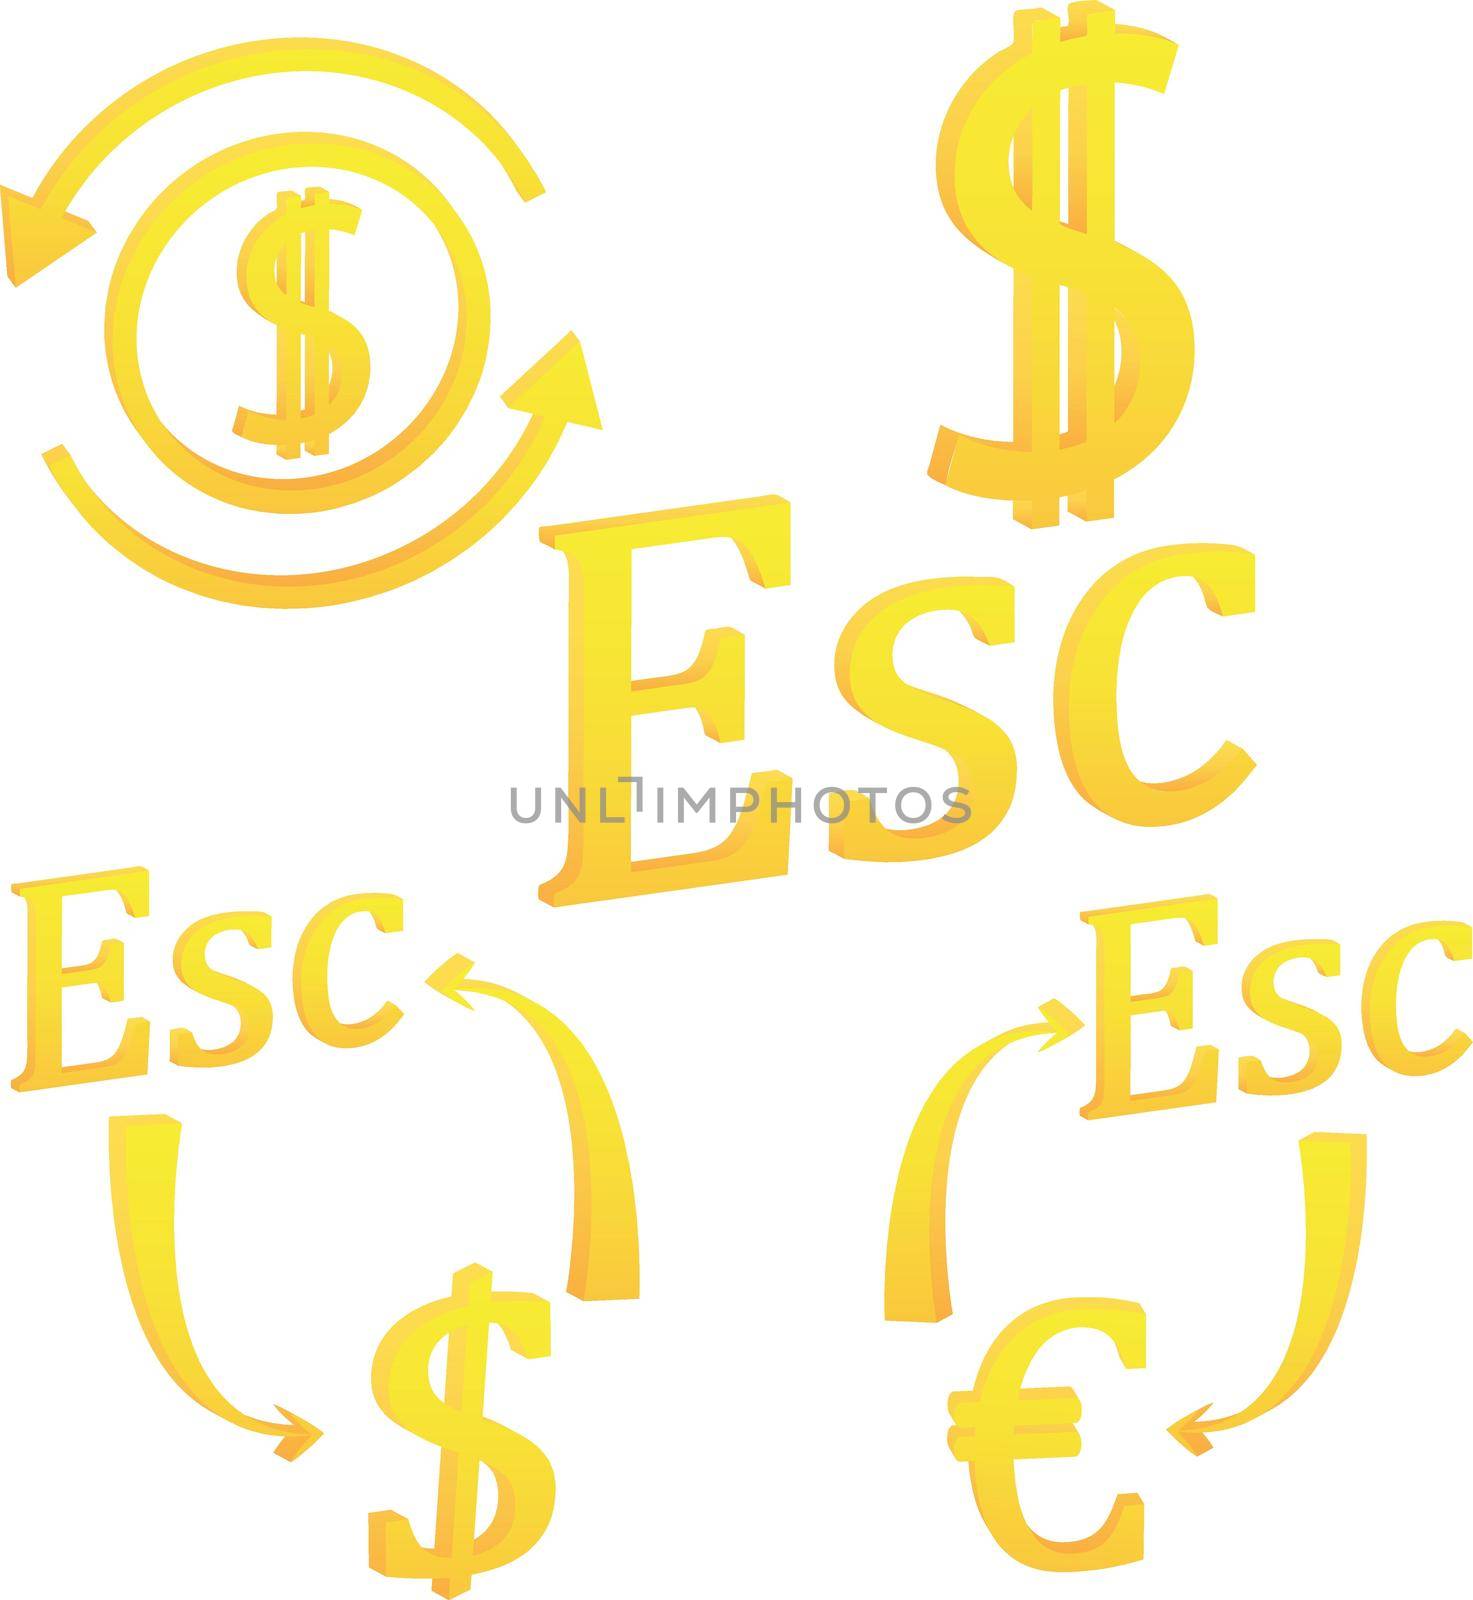 Cape Verde Escudo currency symbol icon vector illustration on a white background